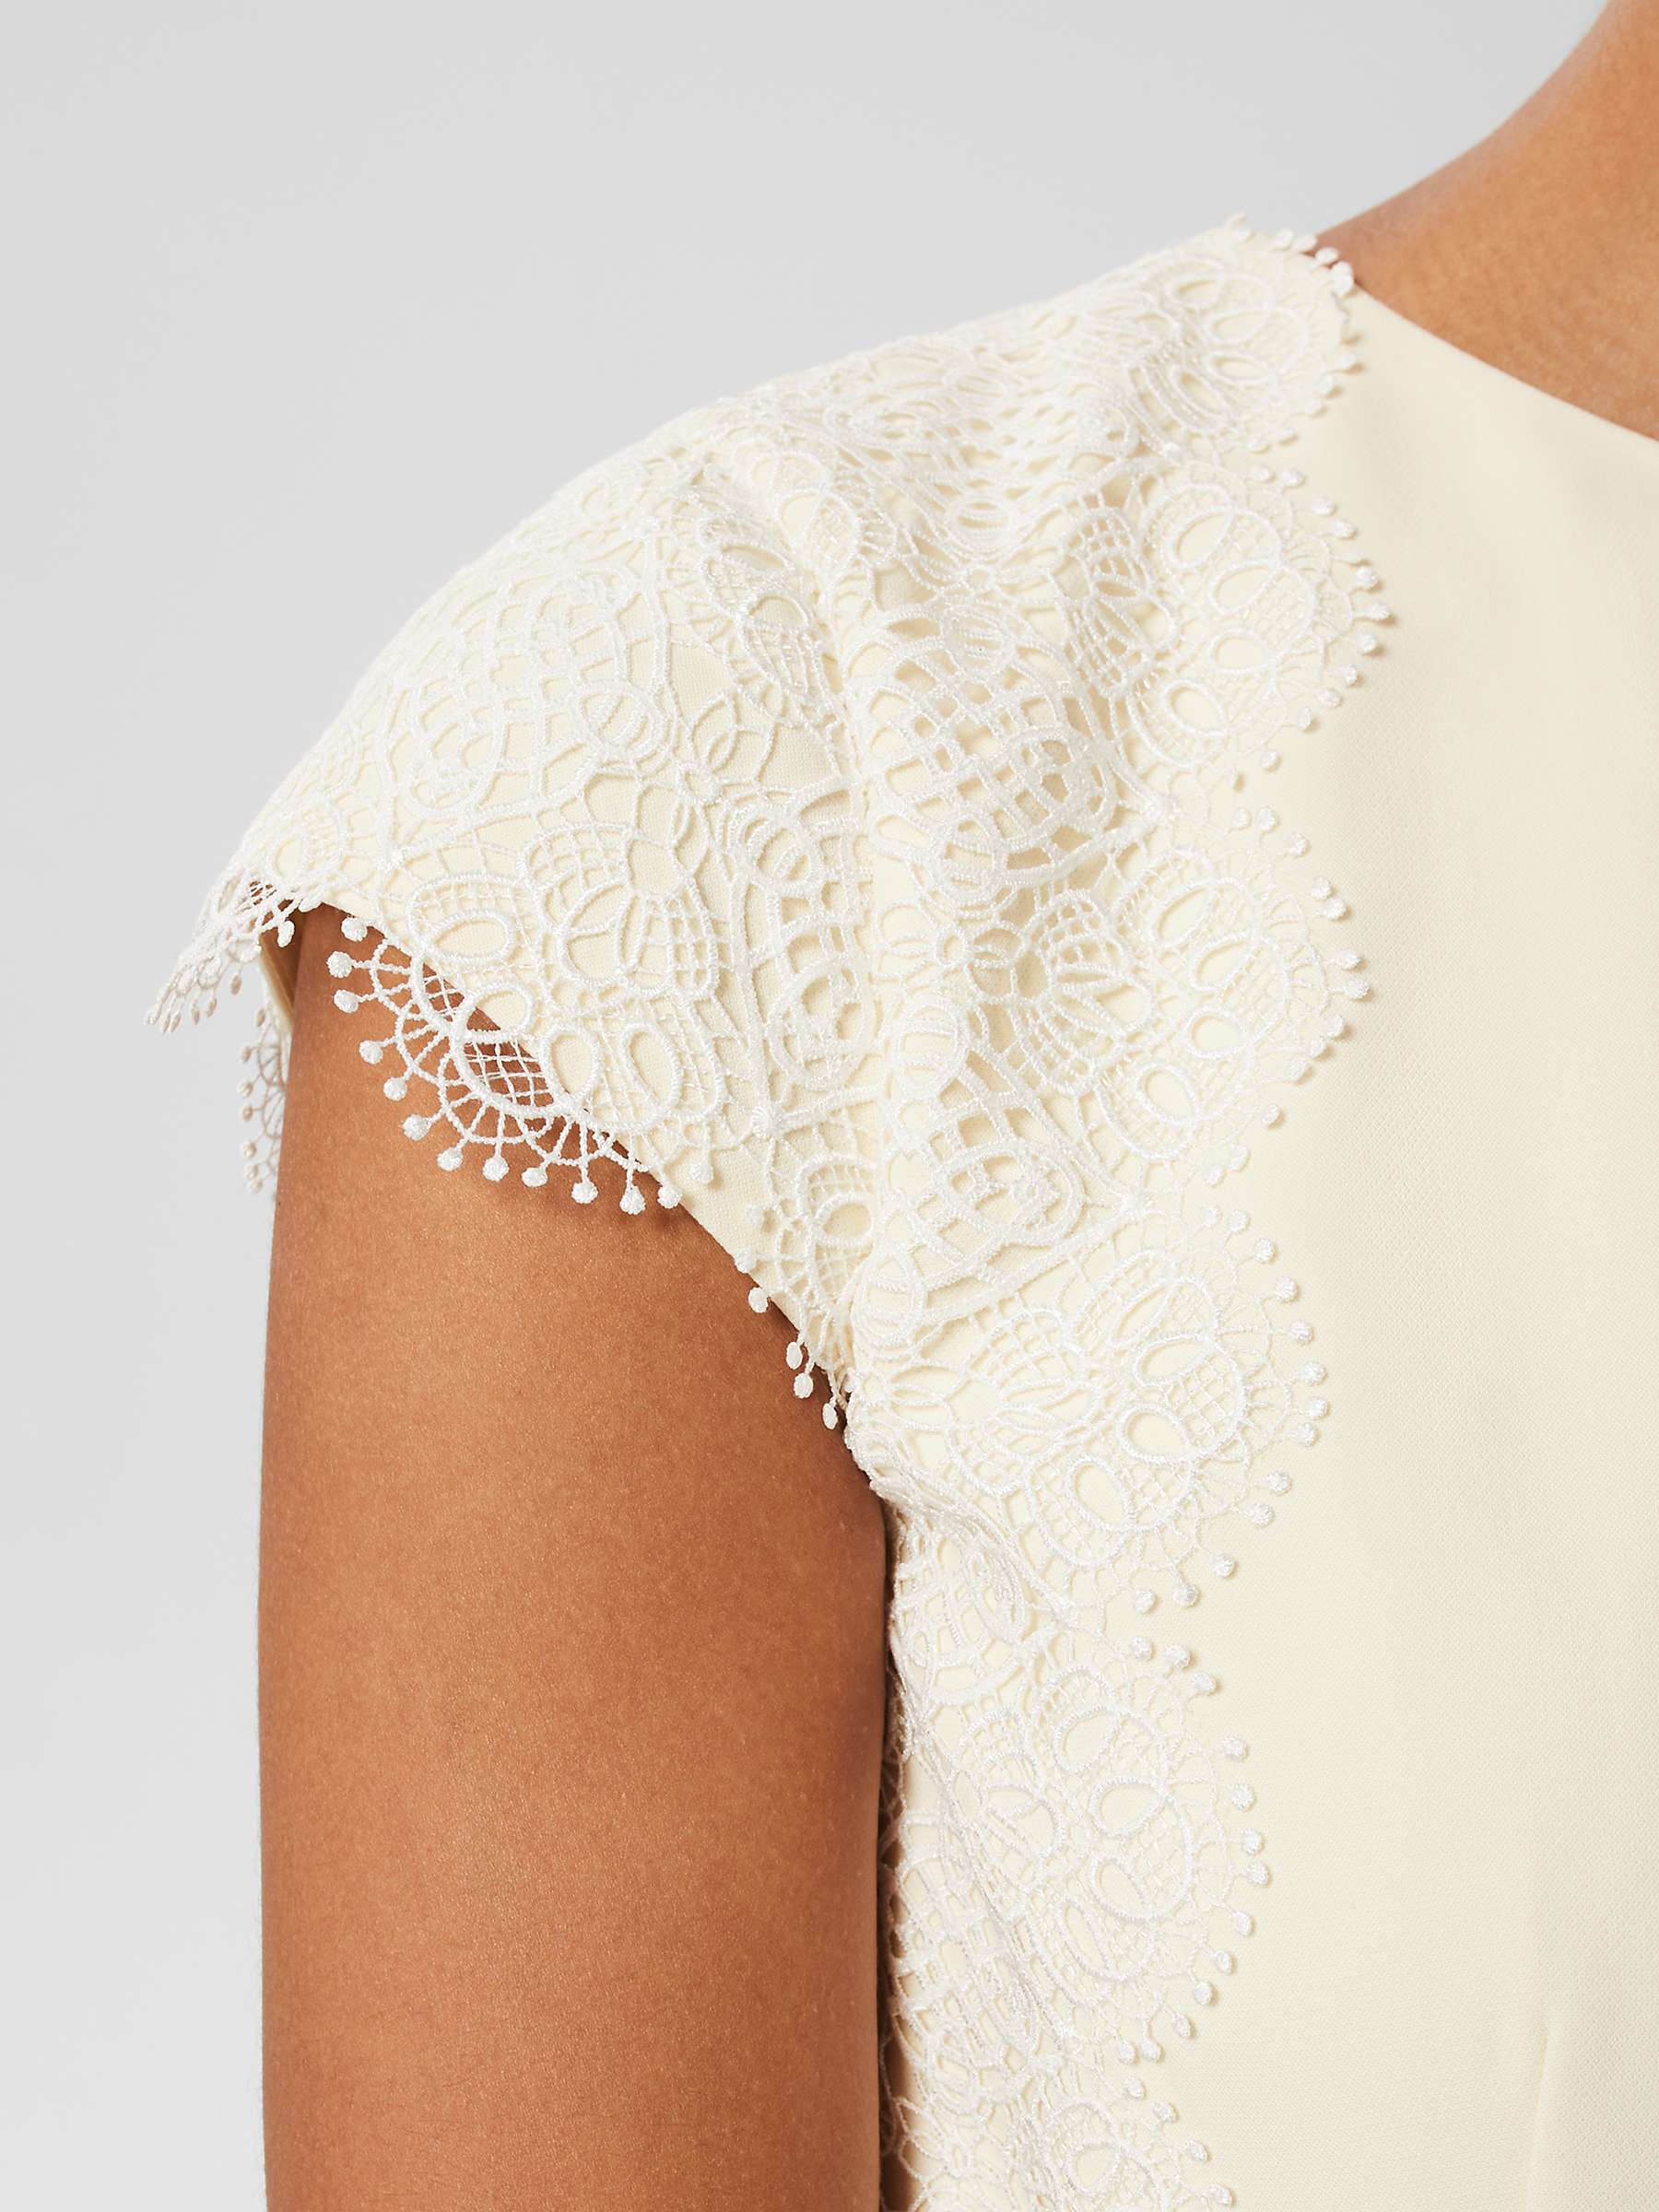 Buy Hobbs Valentina Lace Detail Shift Dress, Pale Yellow Online at johnlewis.com